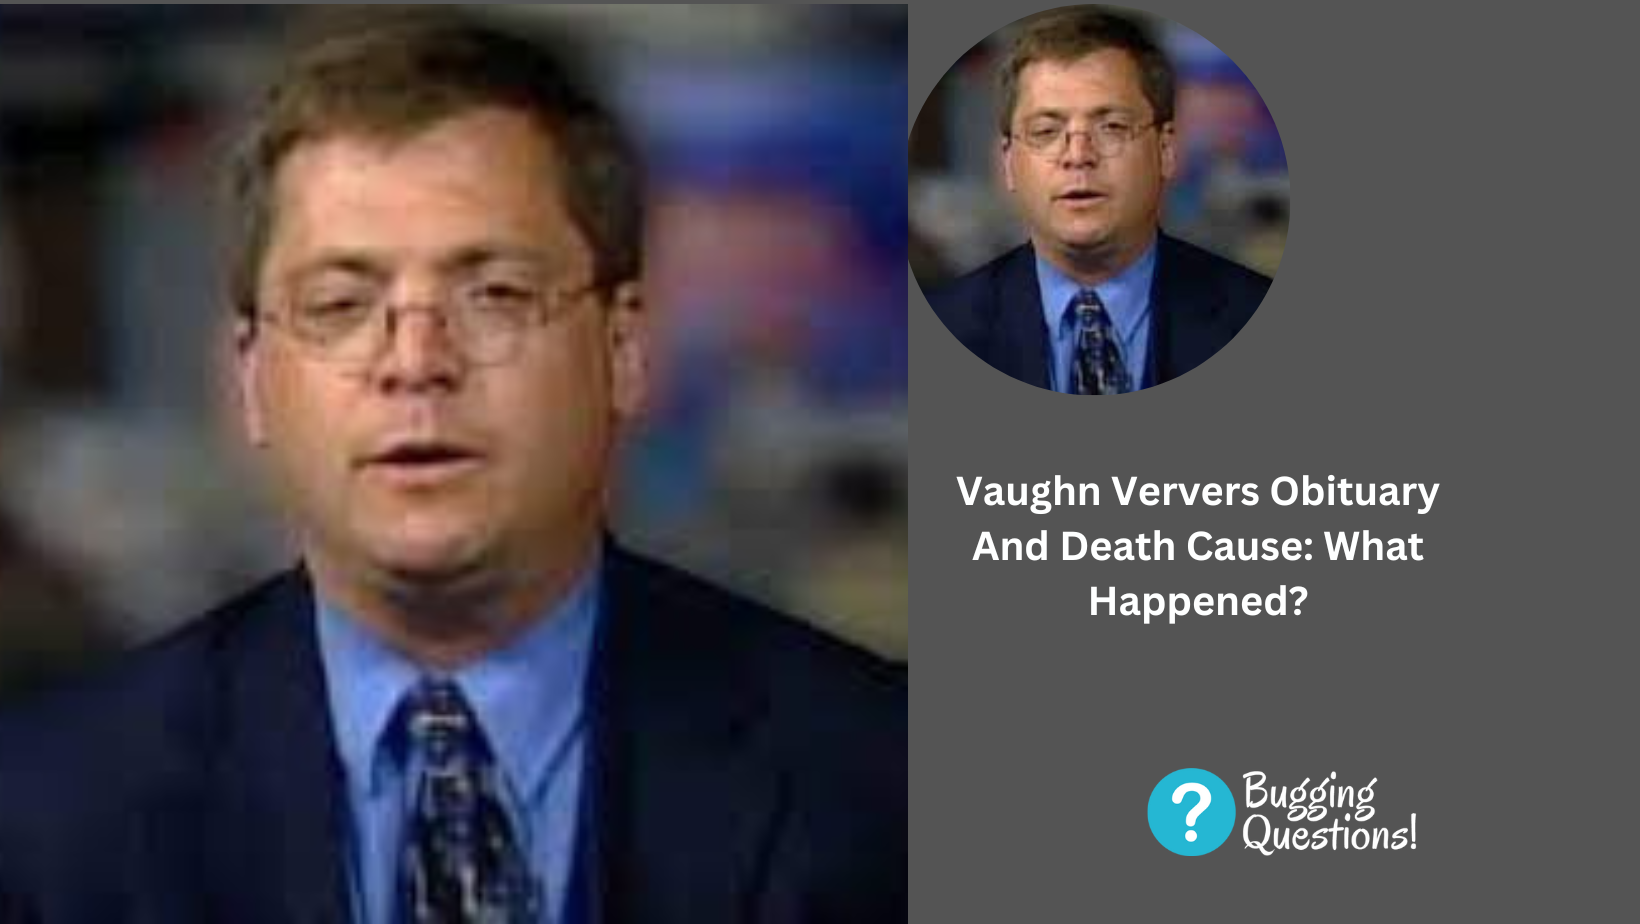 Vaughn Ververs Obituary And Death Cause: What Happened?